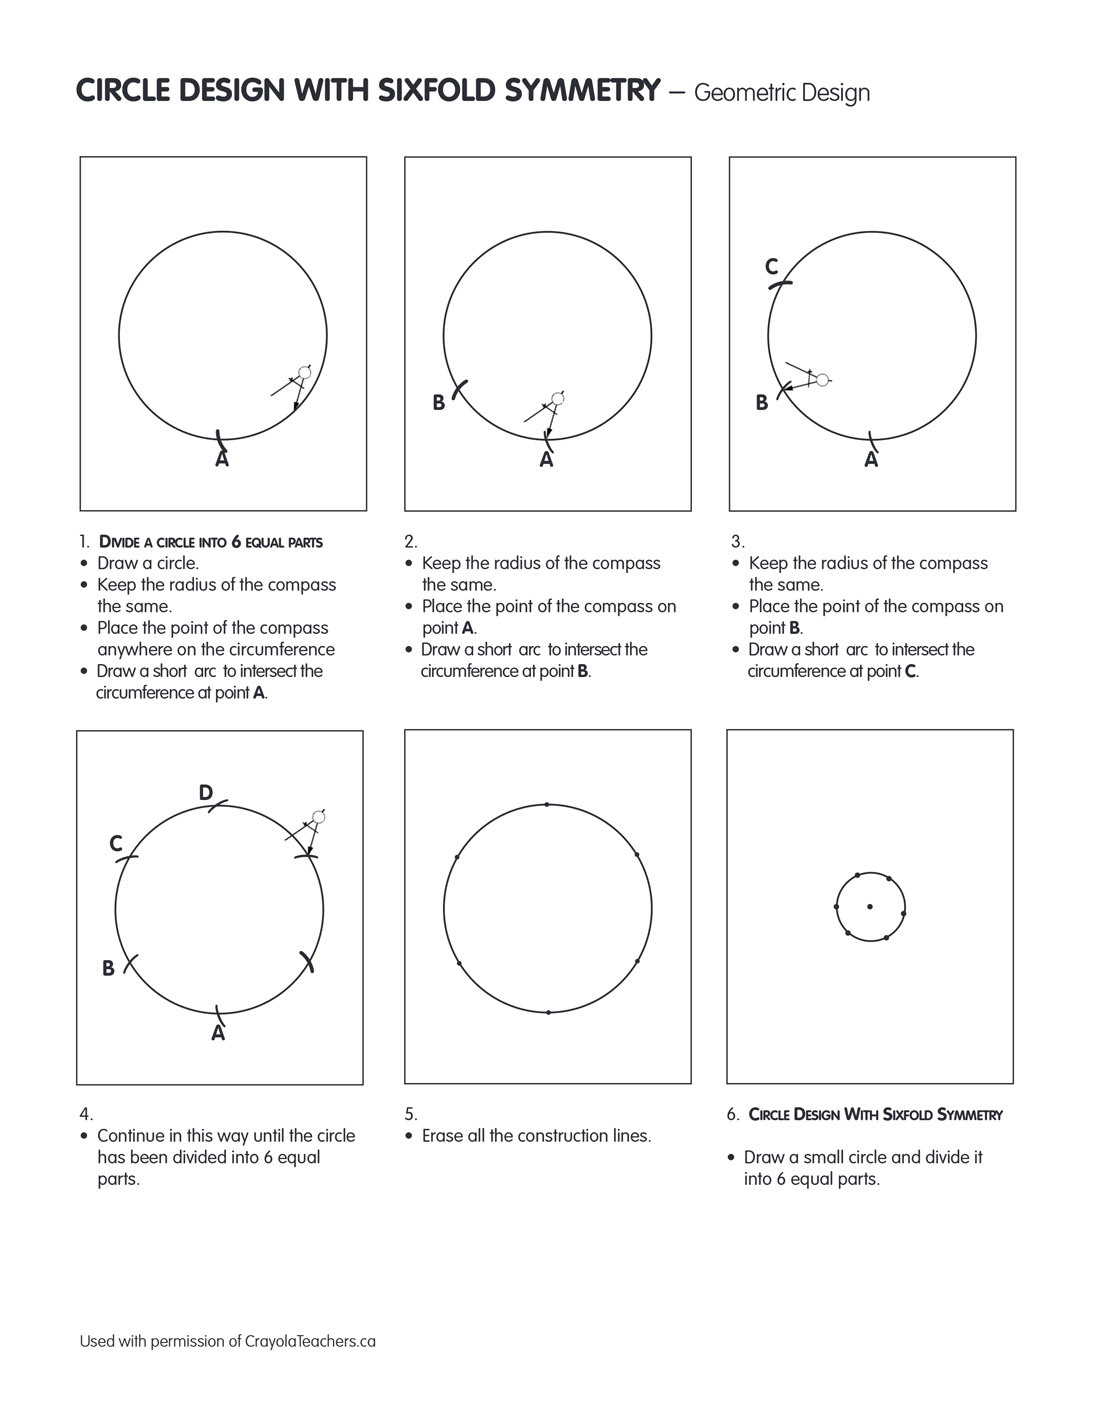 How to Create a Circle Design With Sixfold Symmetry